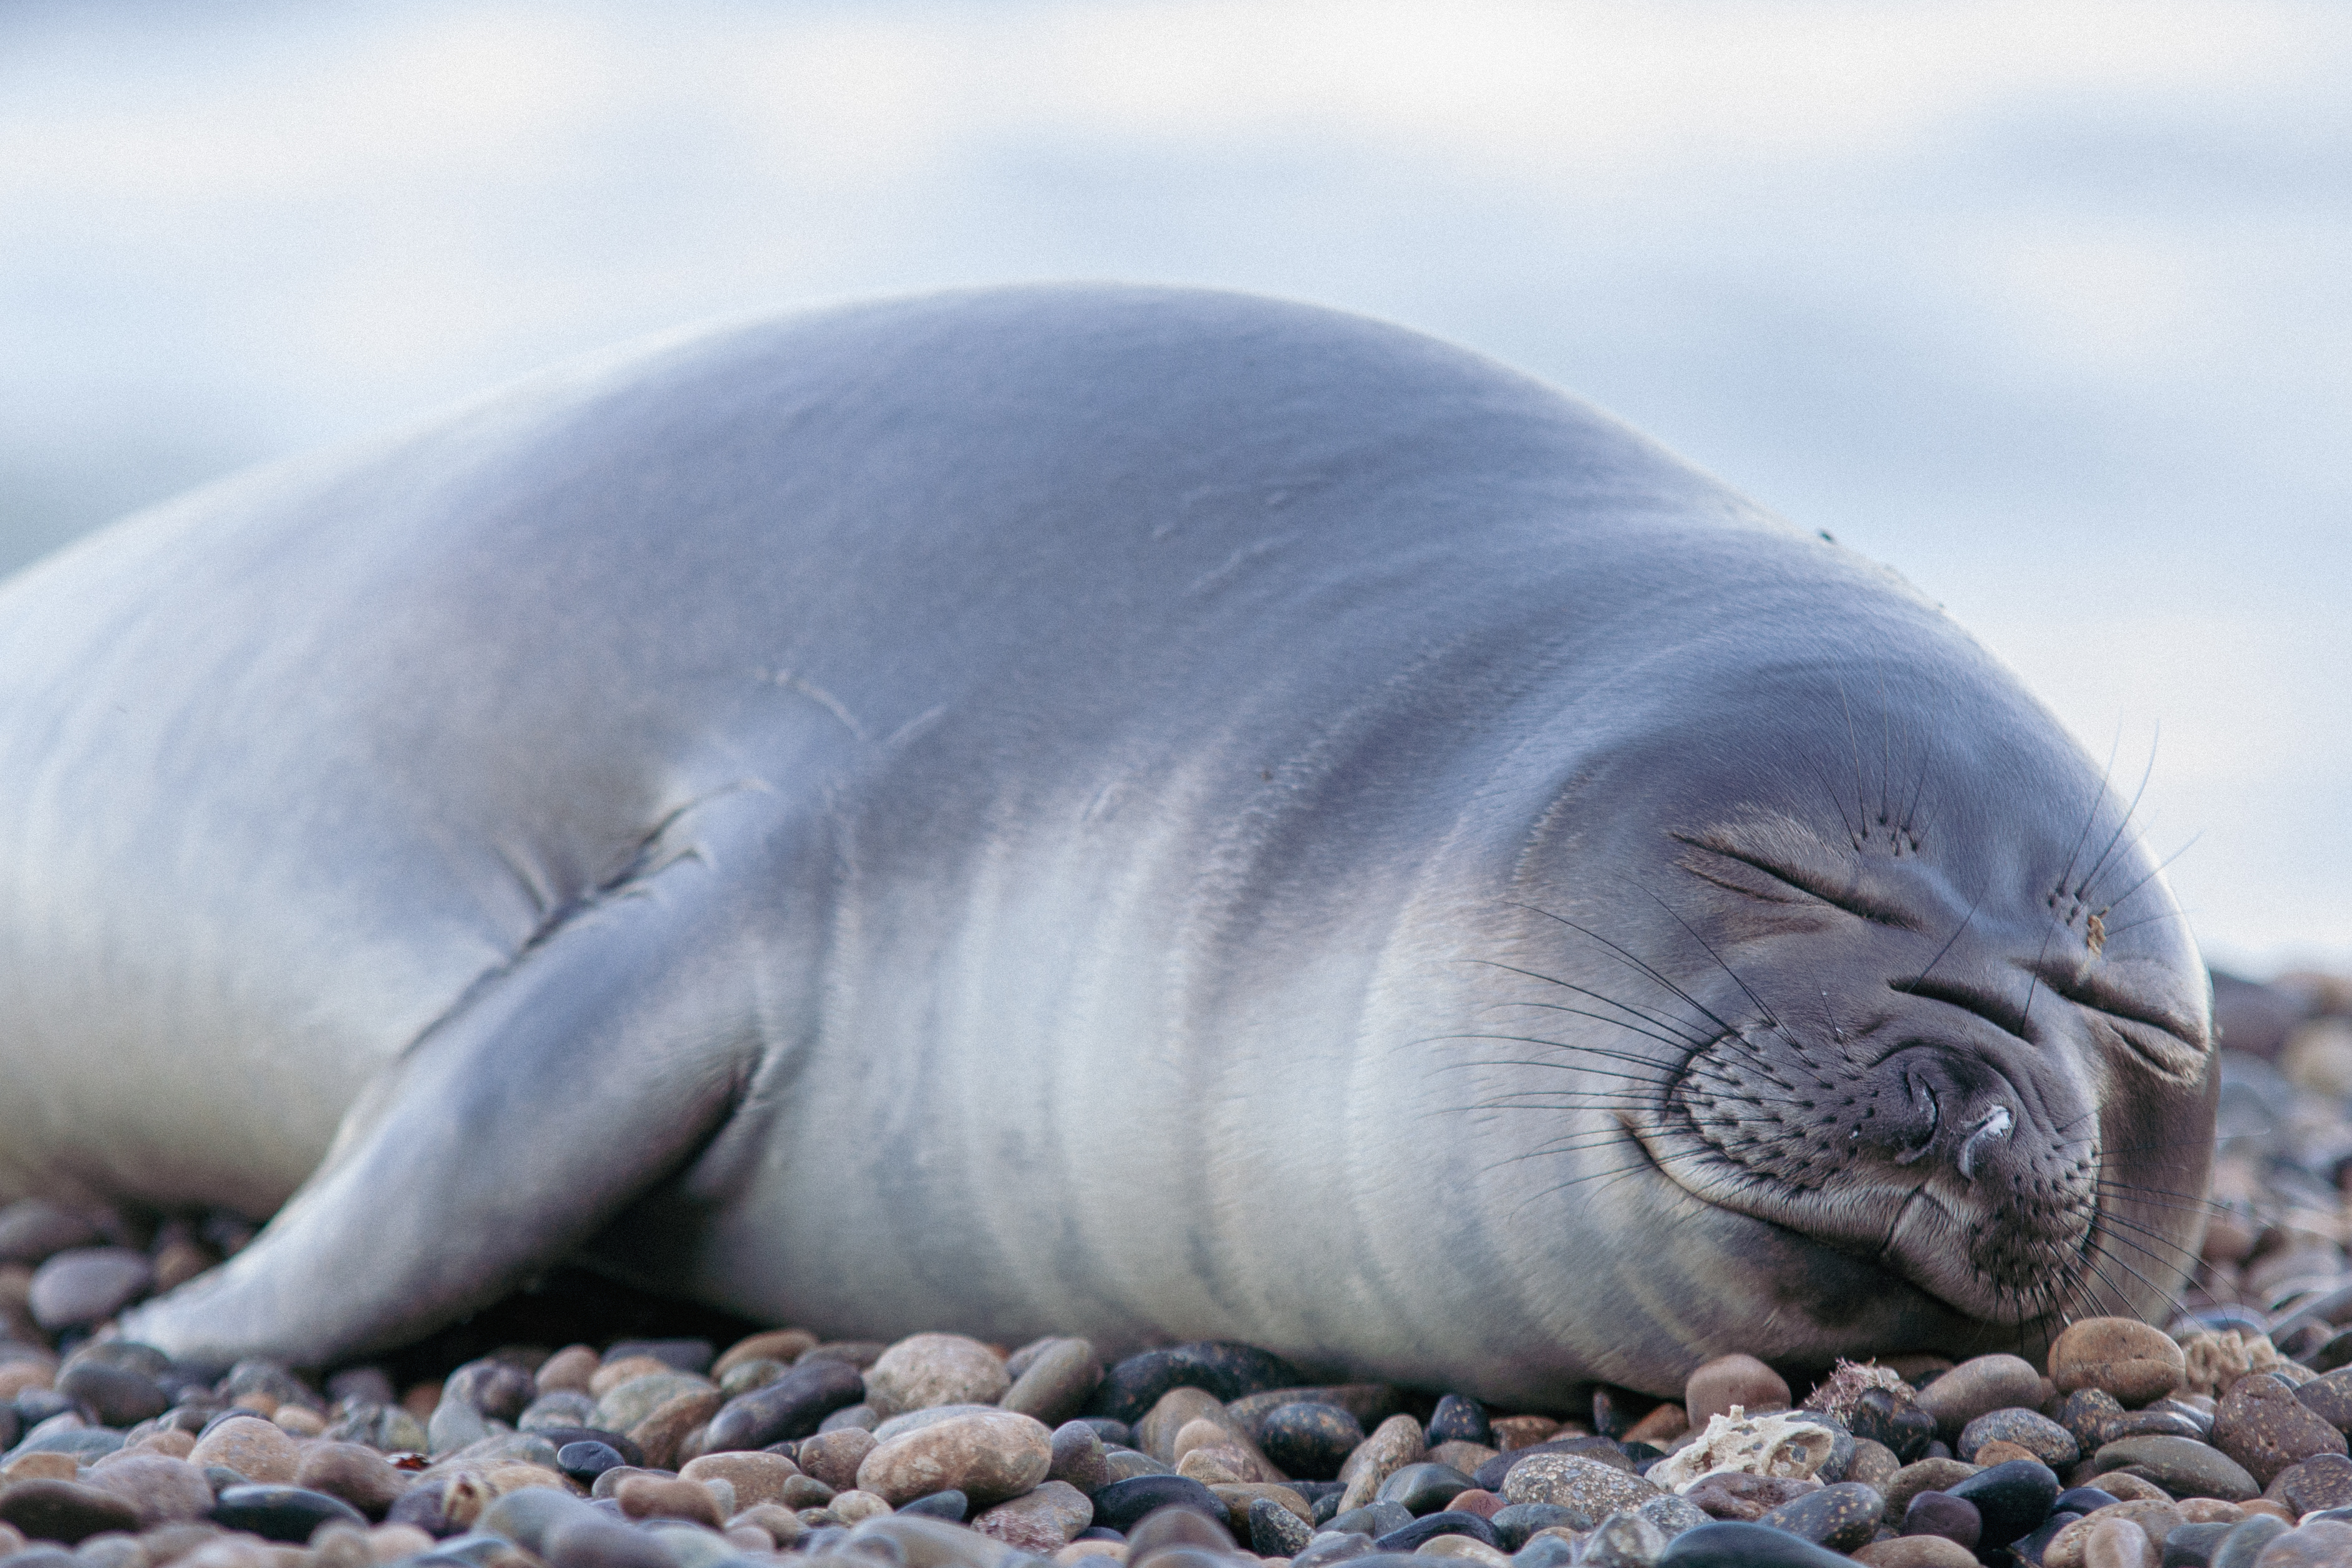 How Elephant Seals Take Naps During Deep Dives in the Ocean